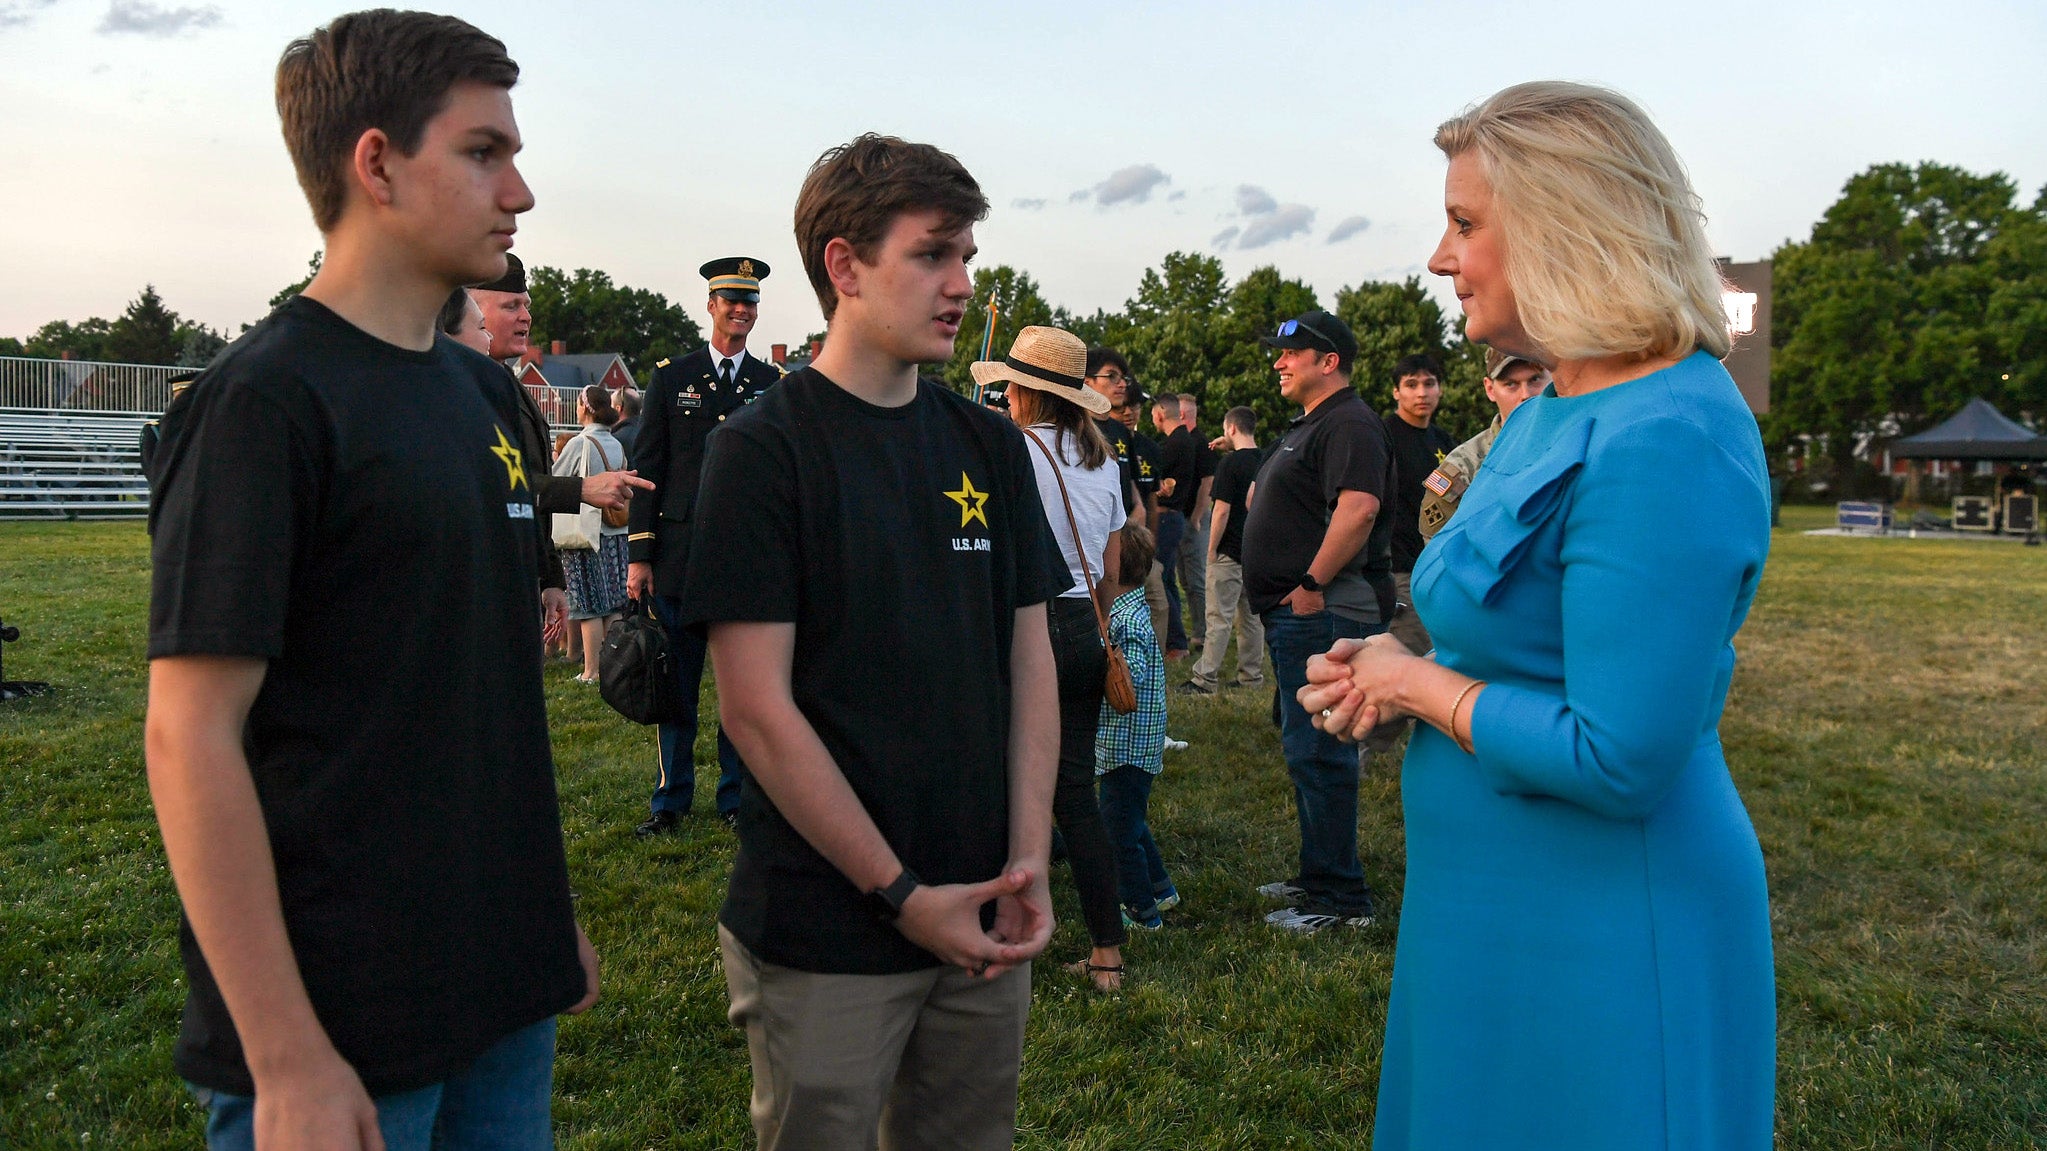 Secretary of the Army Wormuth speaks with recruits